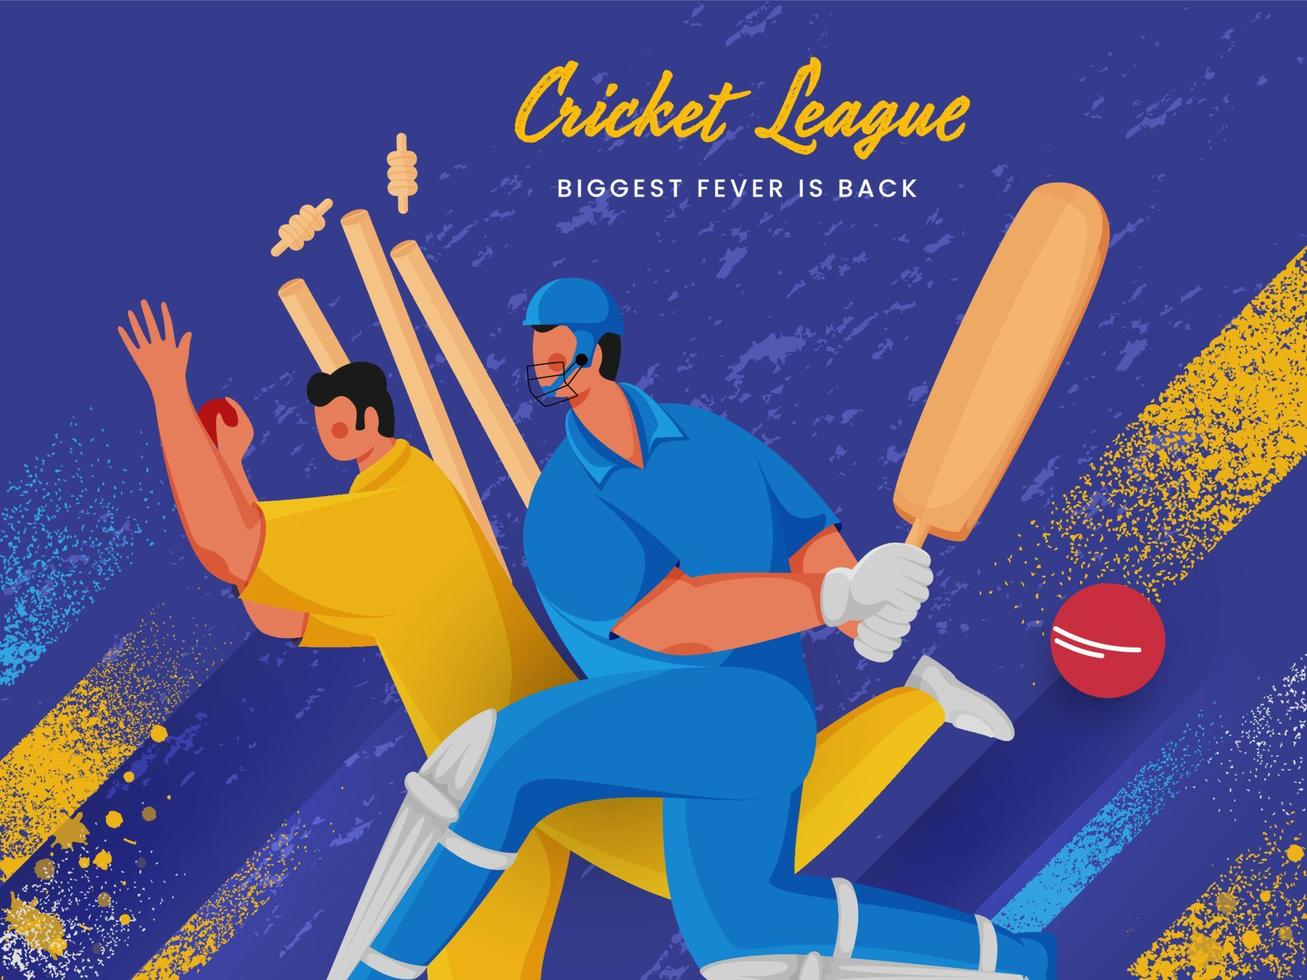 Cricket League Poster or Banner Design with Character of Batsman and Bowler in Playing Pose on Noise Brush Effect Blue Background. vector